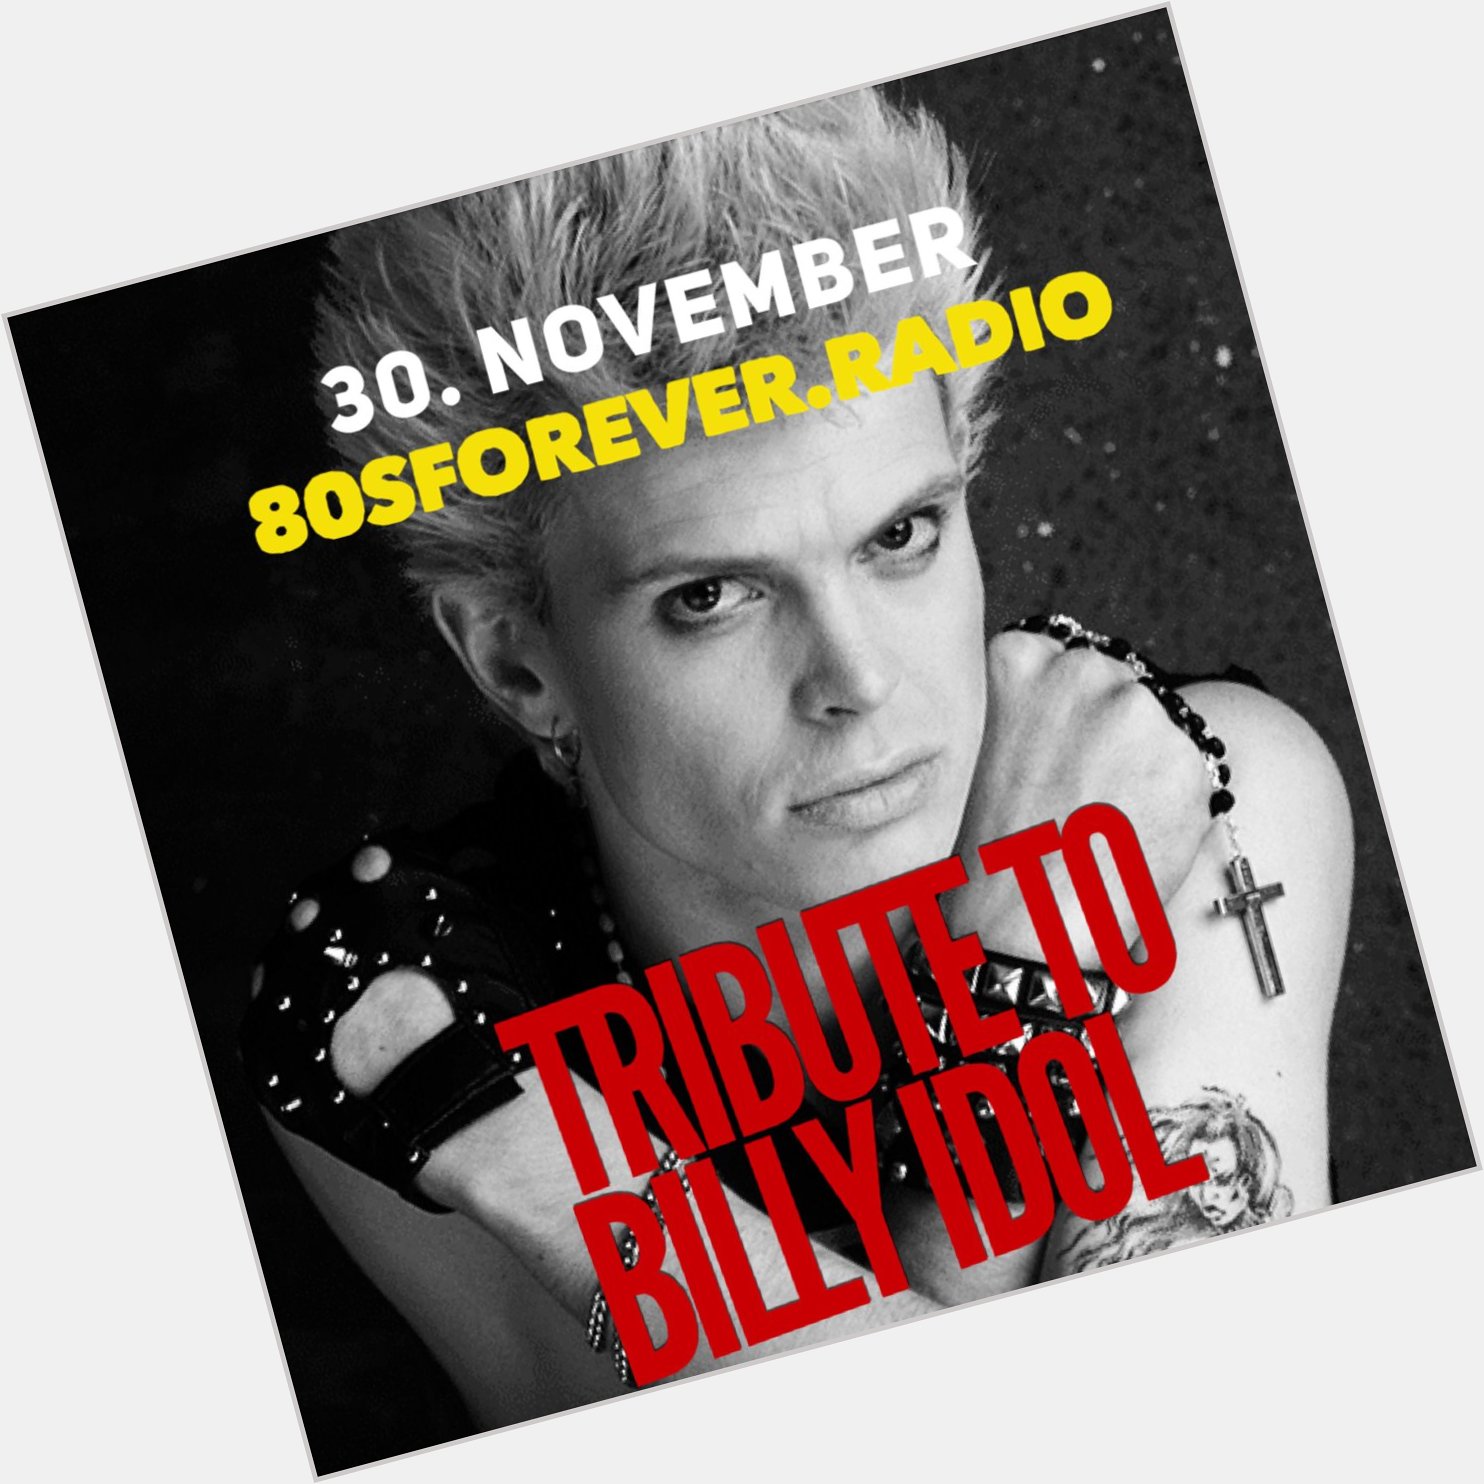 Happy Birthday Billy Idol
Tune In for a Special Tribute Day @  